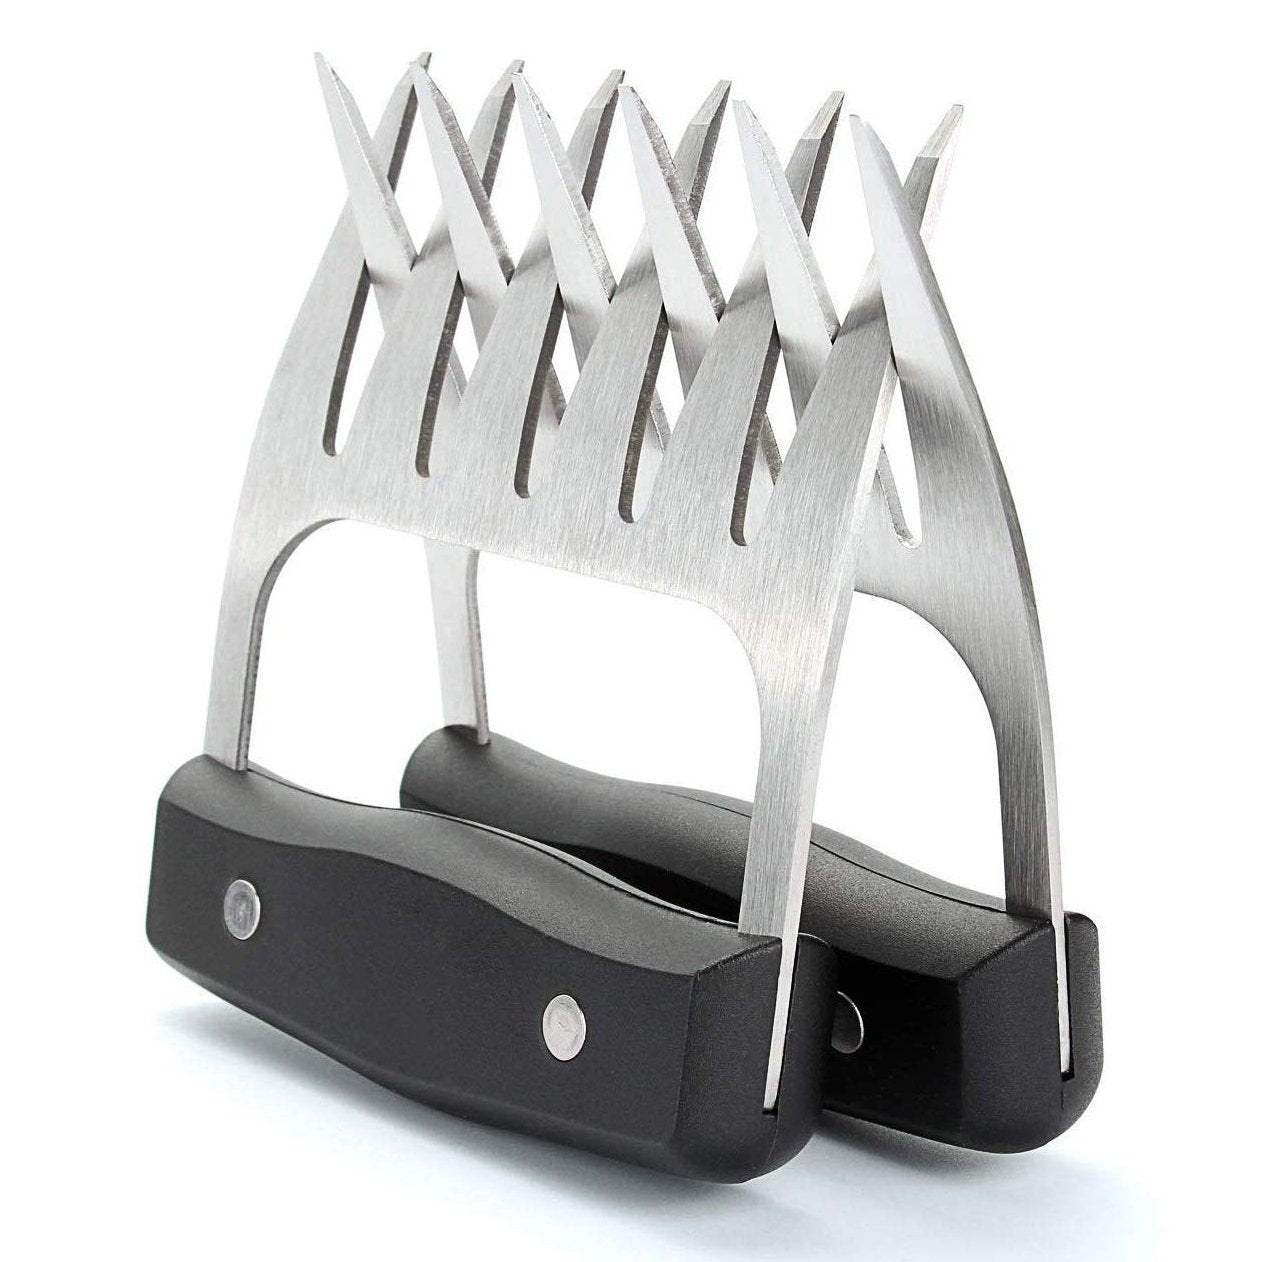 Stainless Steel Meat-Shredding Claws with Wooden Handle / Black